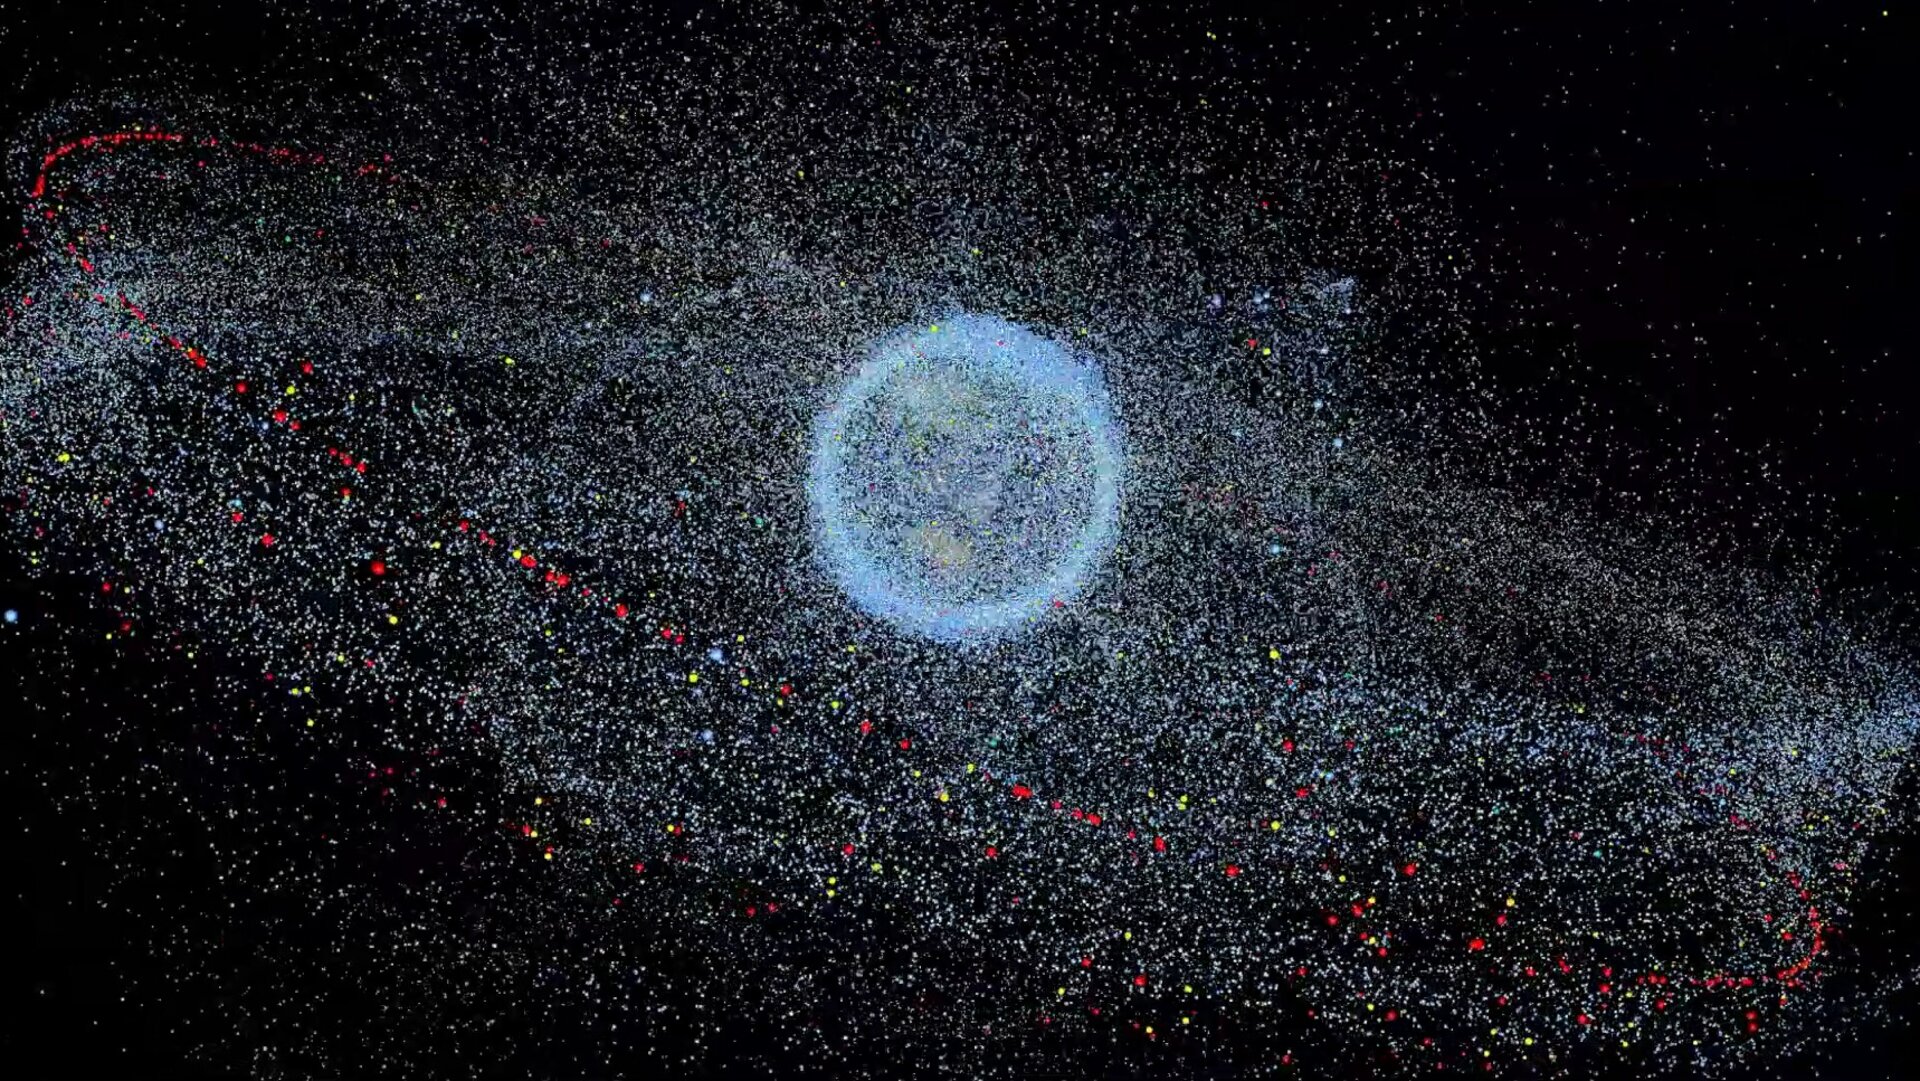 An illustration showig the Distribution of space debris in orbit around Earth. Image Credit: ESA.